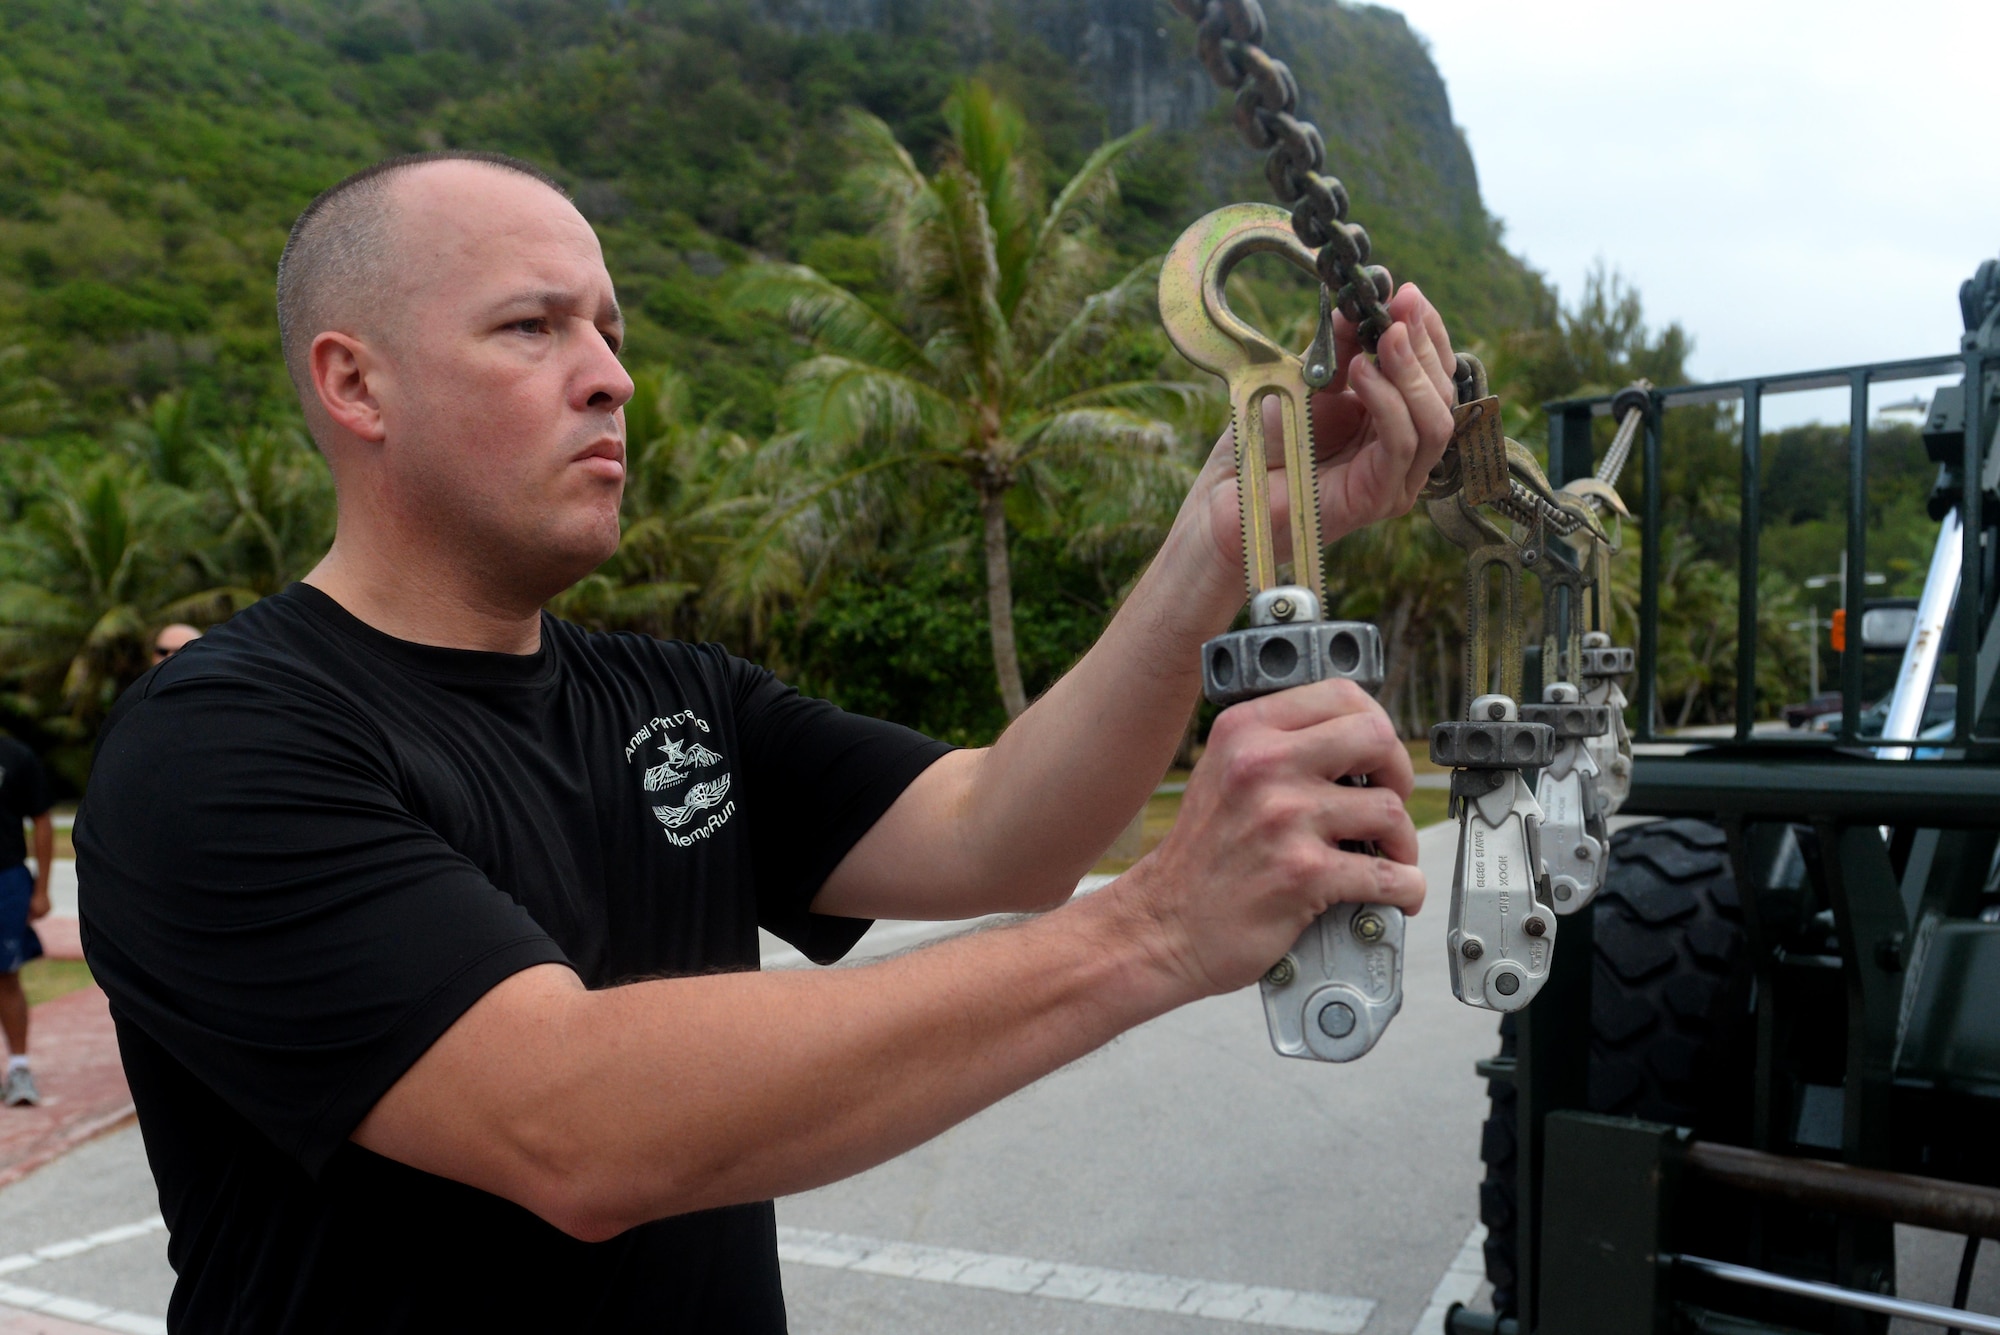 Chief Master Sgt. Travis Owen, 734th Air Mobility Squadron aerial port superintendent, hangs up MB-1 devices on a chain to commemorate fallen air transportation specialists May 20, 2016, at Andersen Air Force Base, Guam. Aerial porters, commonly referred to as Port Dawgs, are responsible for military logistics related to aerial ports and come from multiple units on Andersen to include the 734th AMS, 36th Contingency Response Group and 36th Mission Readiness Squadron. (U.S. Air Force photo by Airman 1st Class Alexa Ann Henderson)